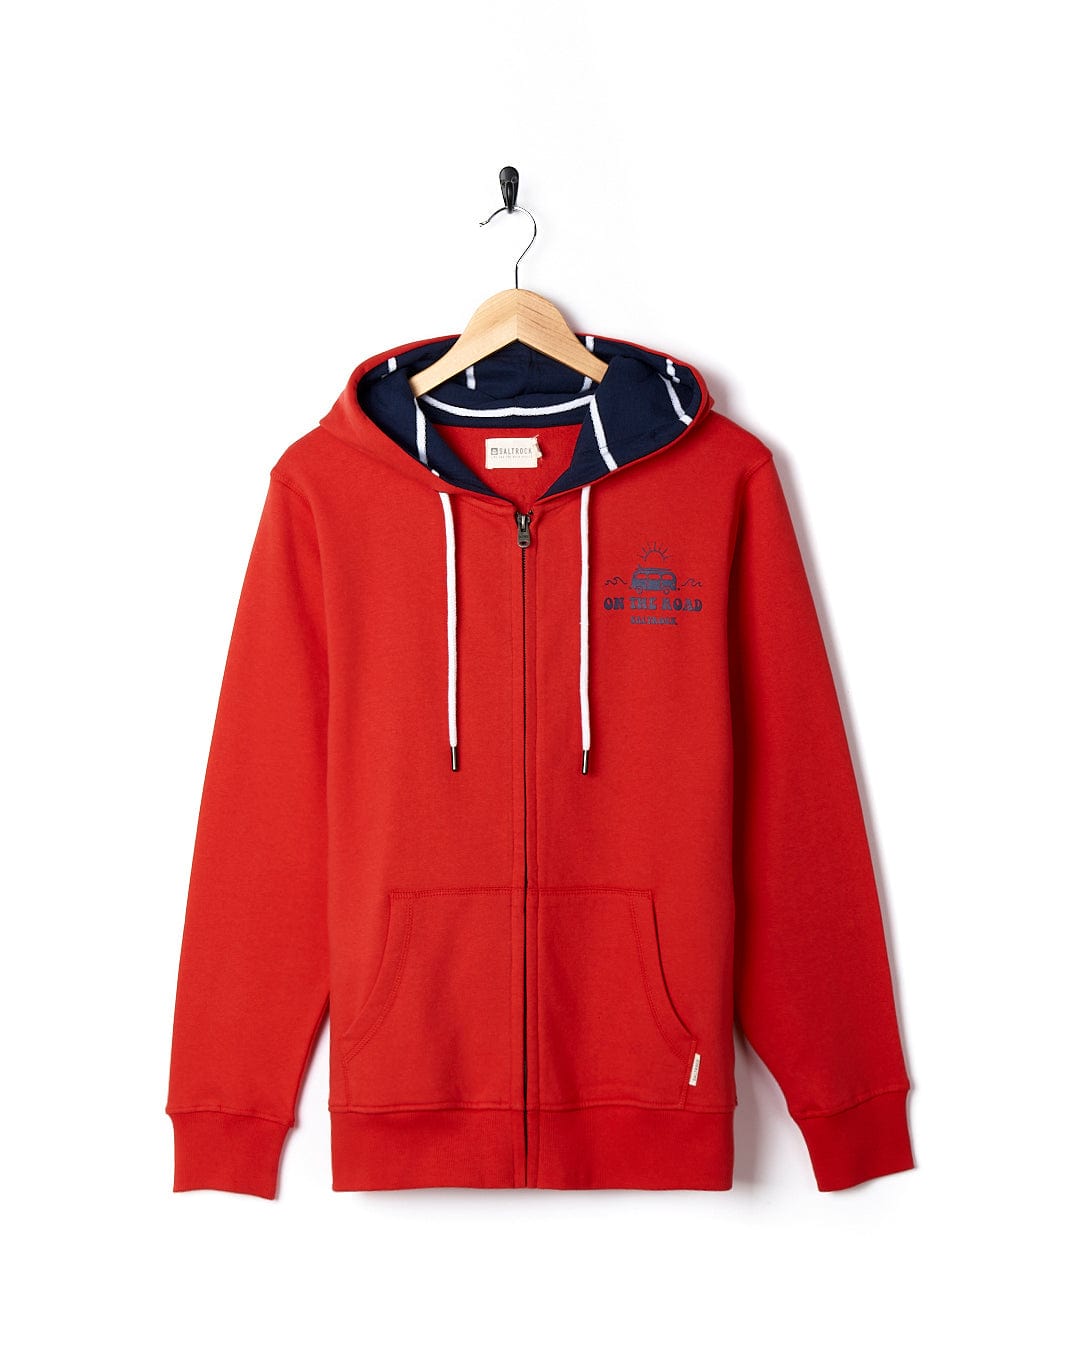 A Saltrock red hooded sweatshirt with a navy logo.